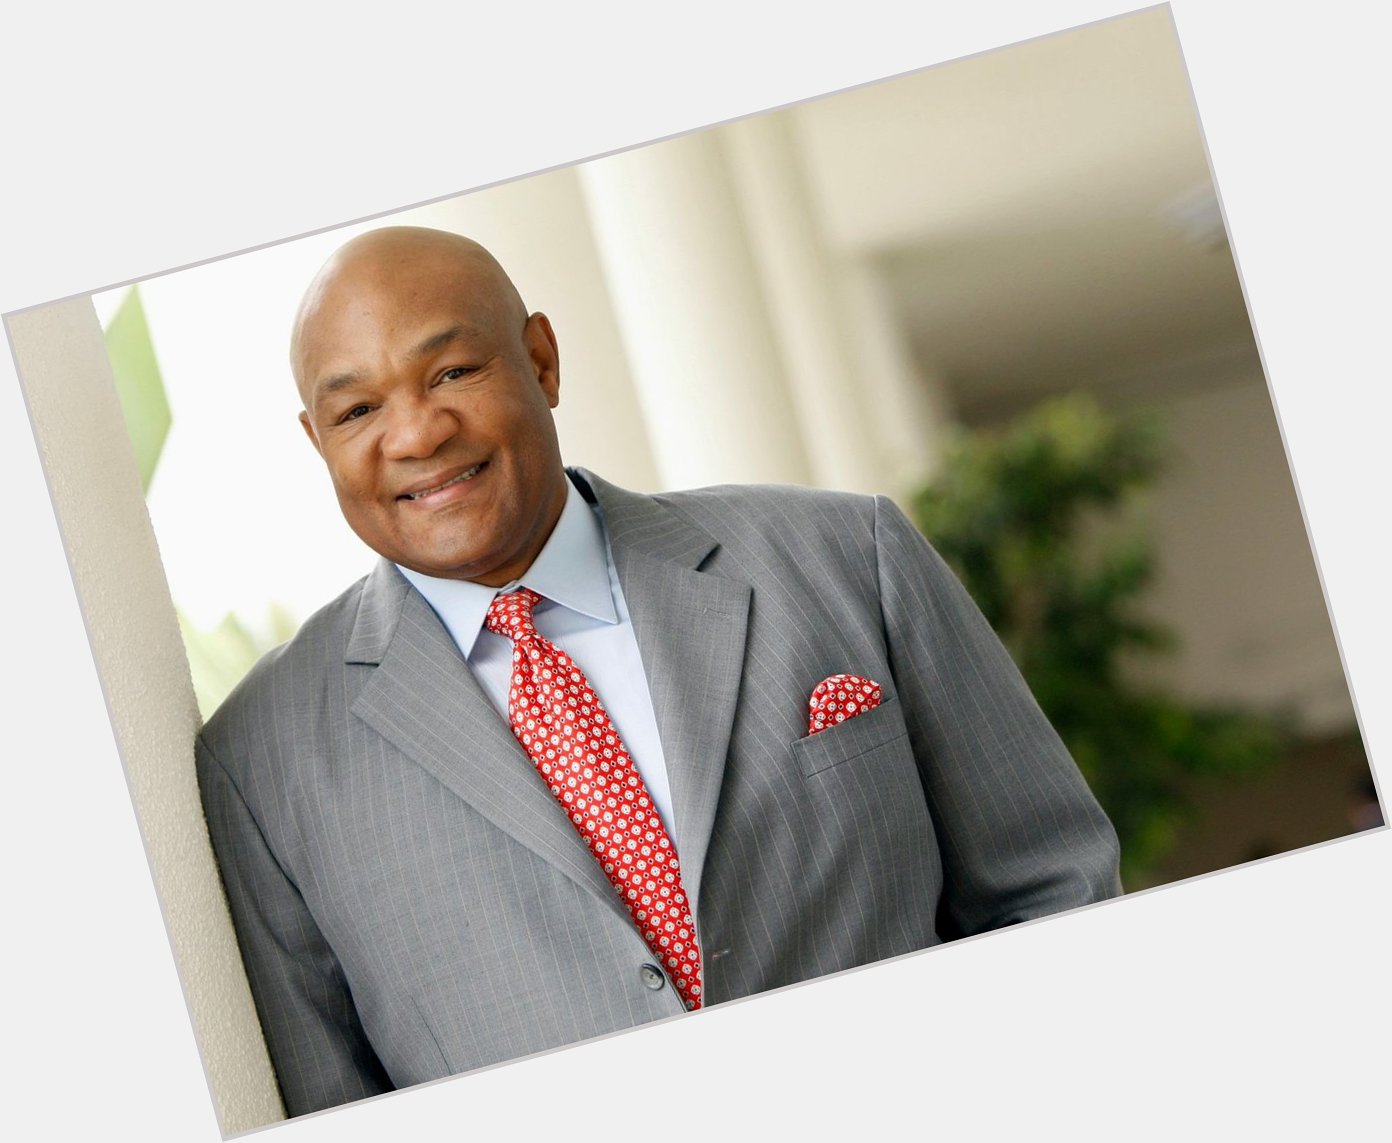 Former professional boxer George Foreman is celebrating his 68th birthday today. Happy Birthday! 